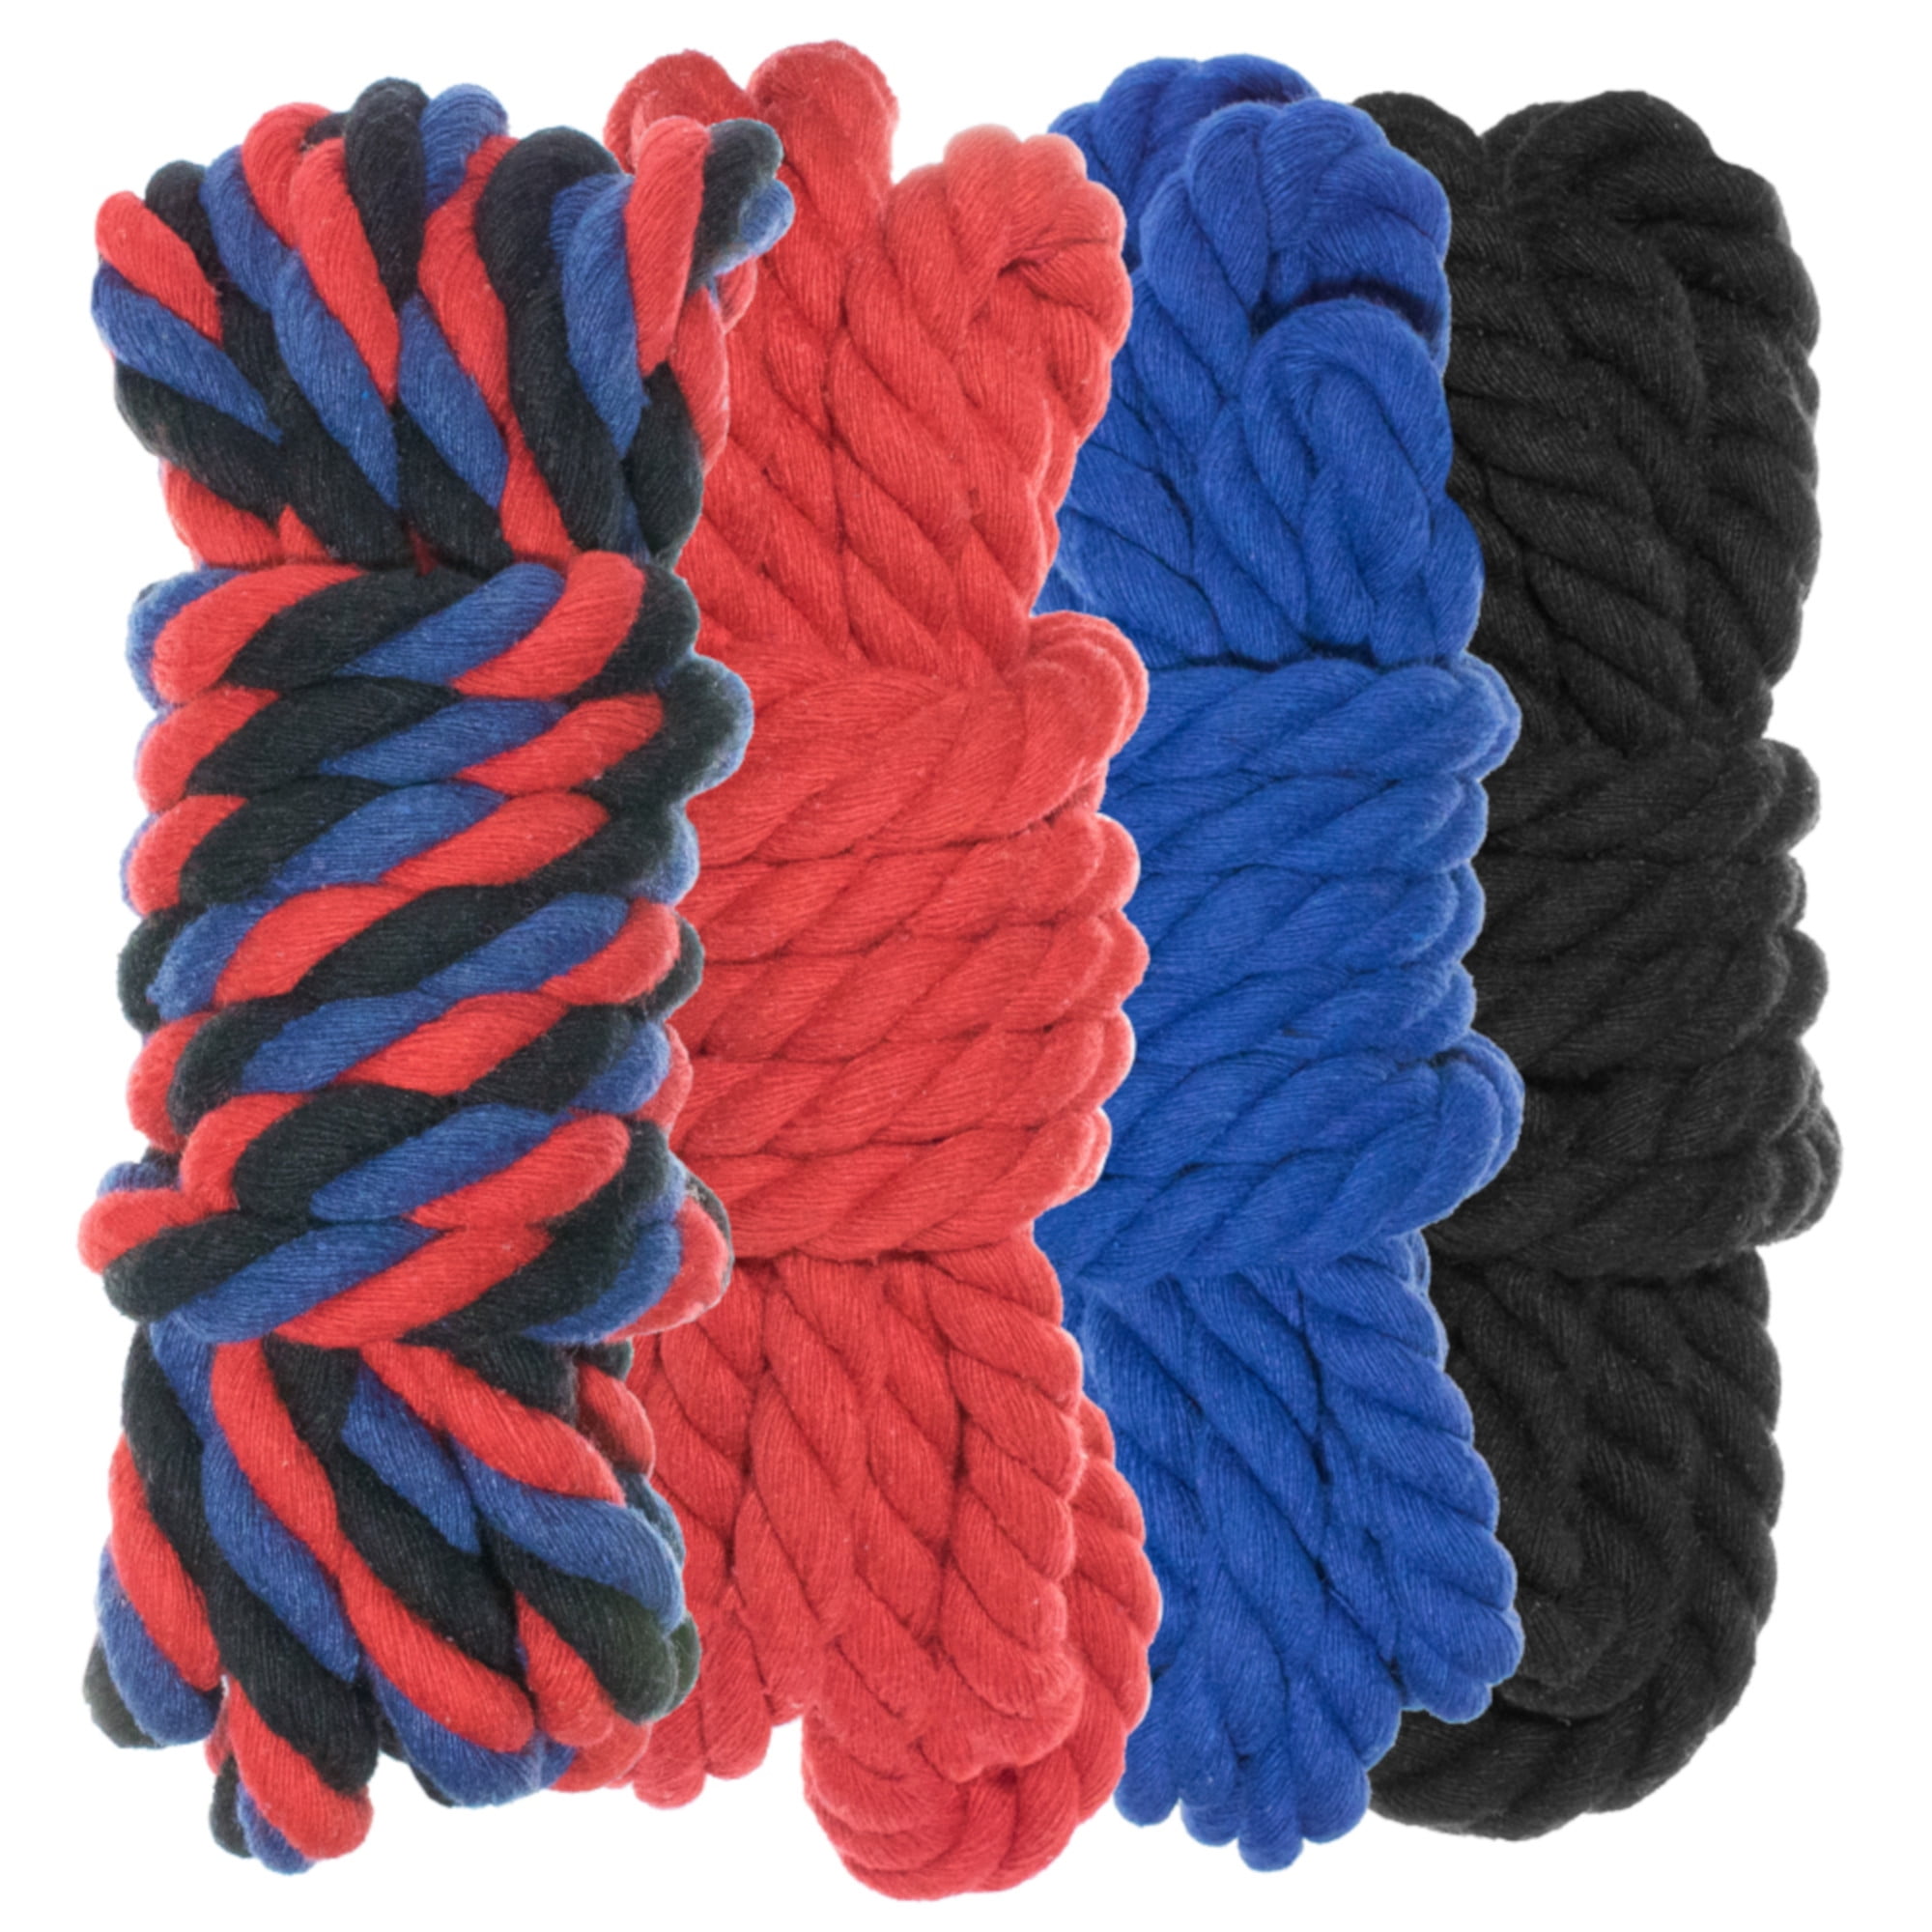 Natural Twisted Cotton Rope 1/2 Inch × 50 Feet Colorful Thick Rope